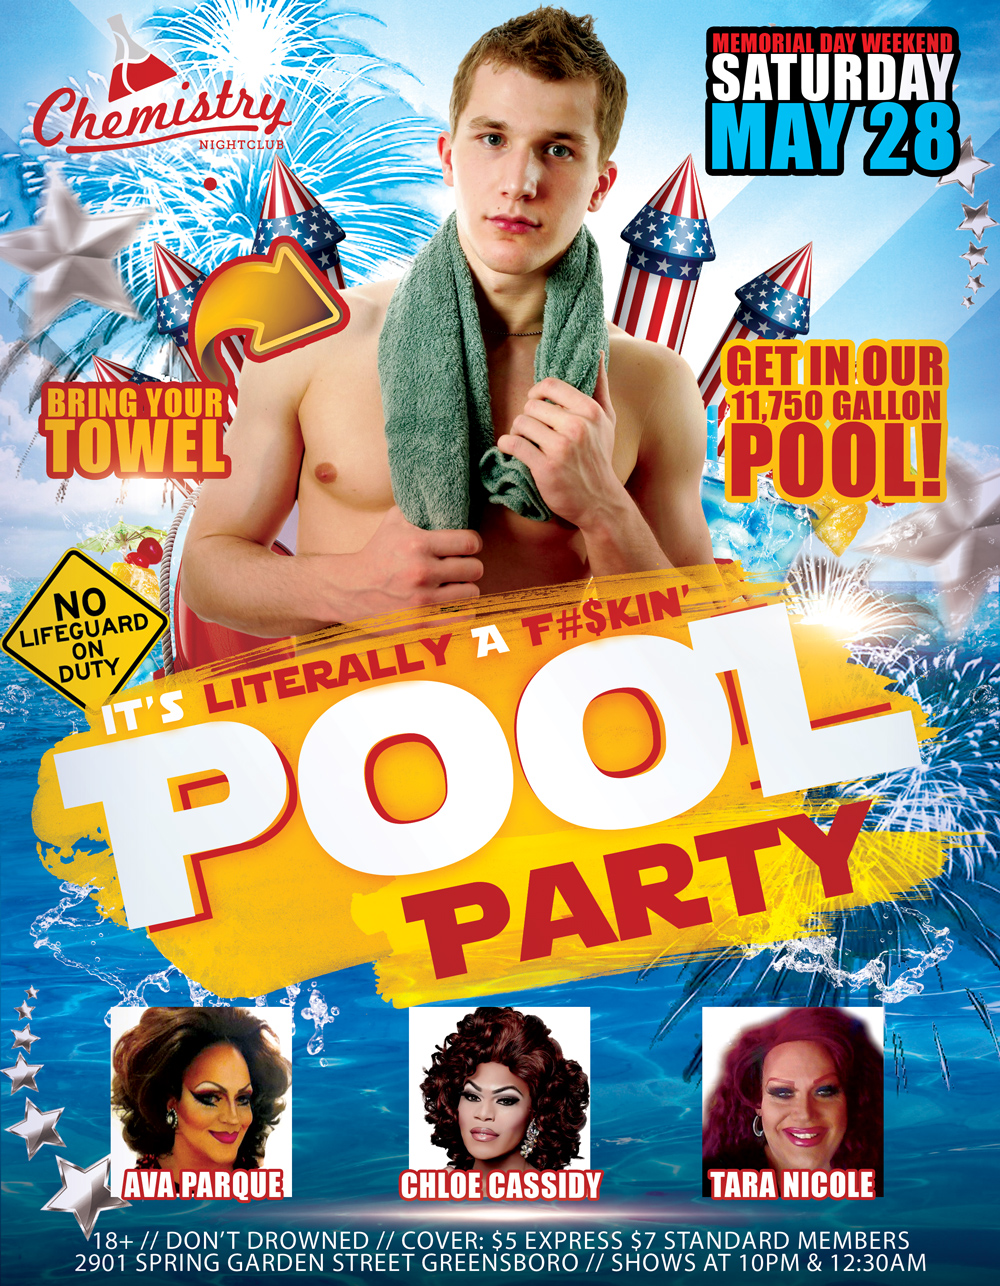 Pool-Party-May-21-Chemistry